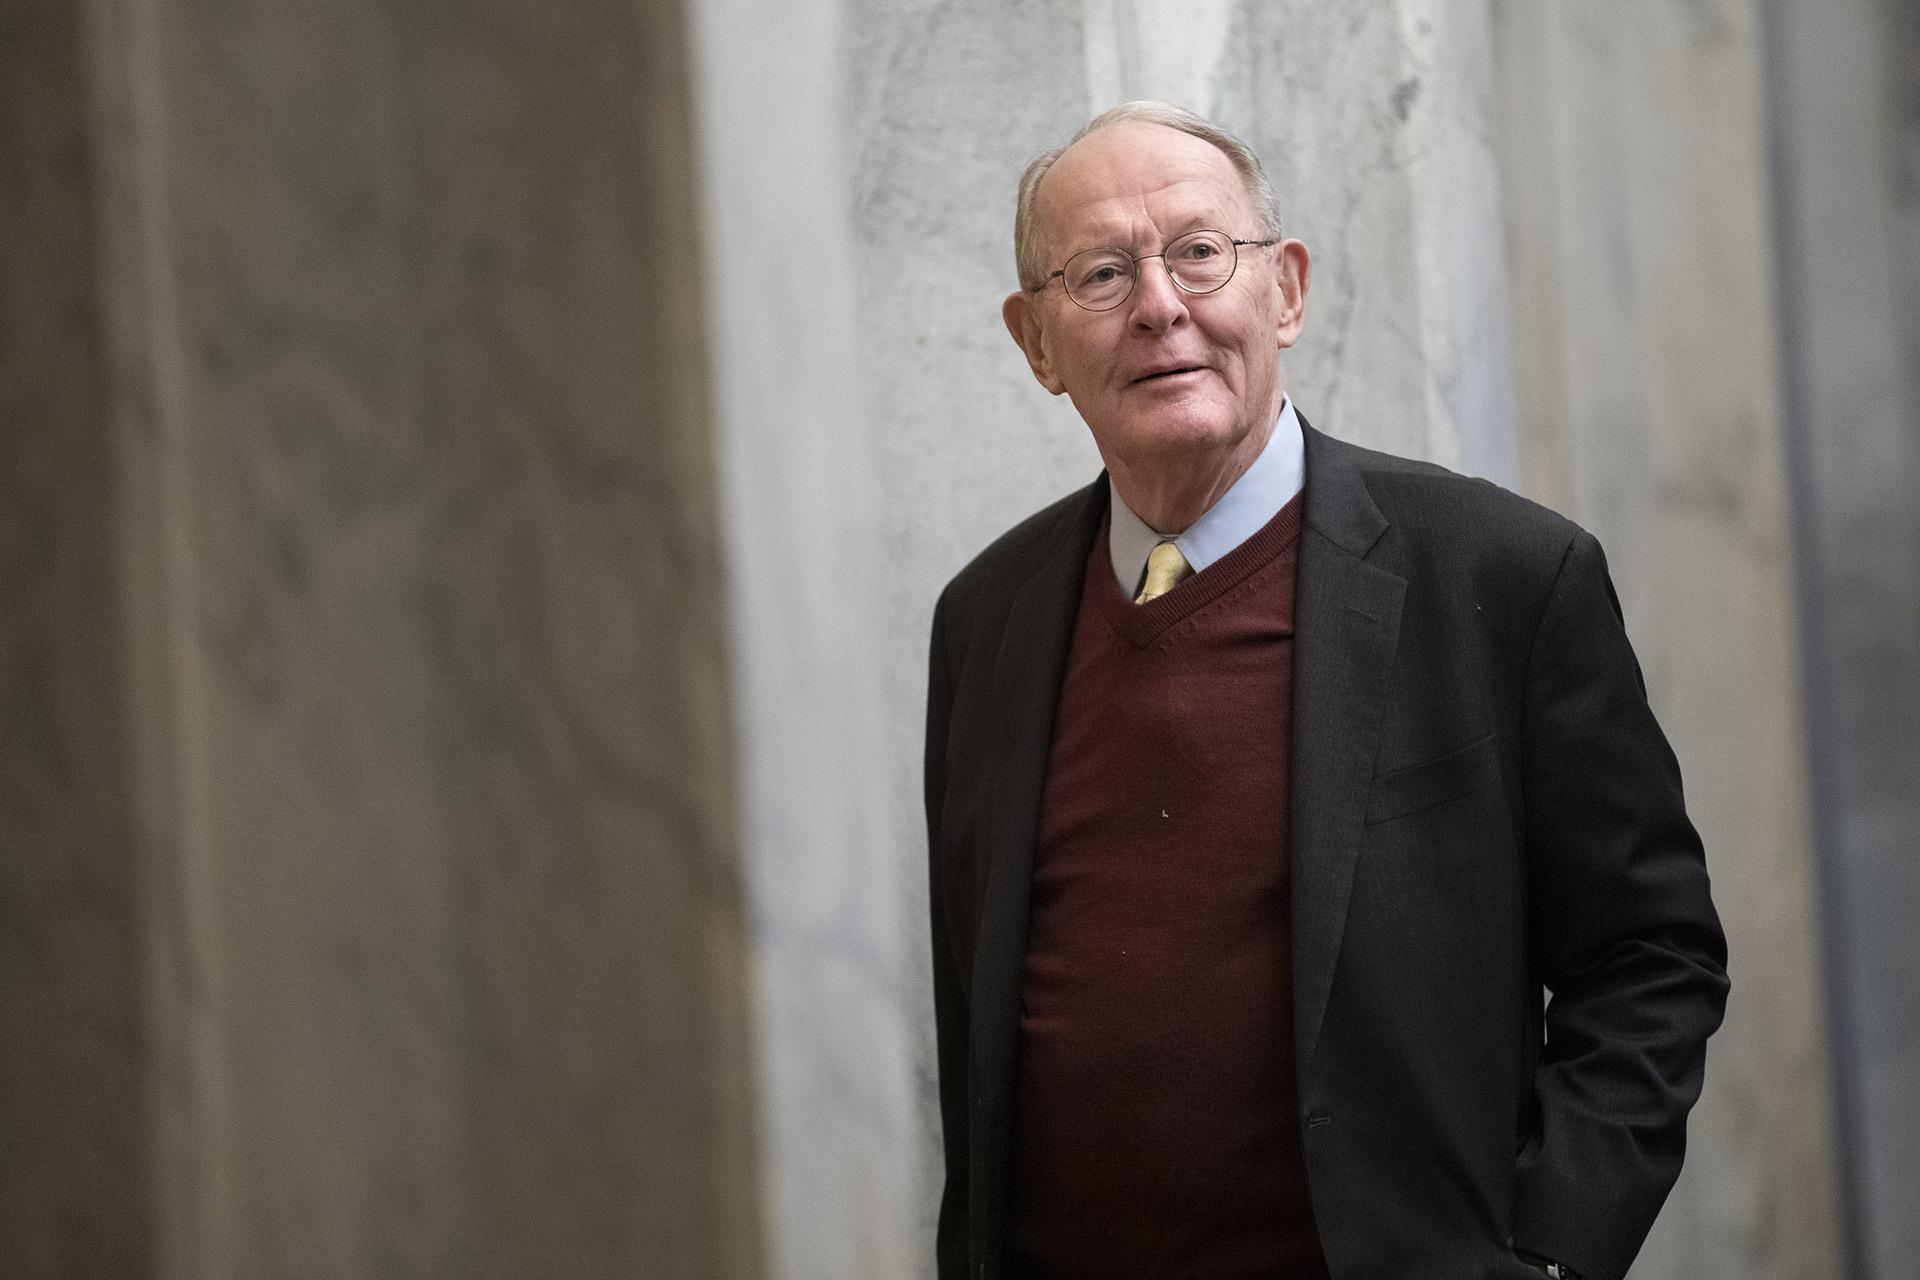 Sen. Lamar Alexander, R-Tenn., arrives on Capitol Hill in Washington, Thursday, Jan. 30, 2020, before the impeachment trial of President Donald Trump on charges of abuse of power and obstruction of Congress. (AP Photo/ Jacquelyn Martin)